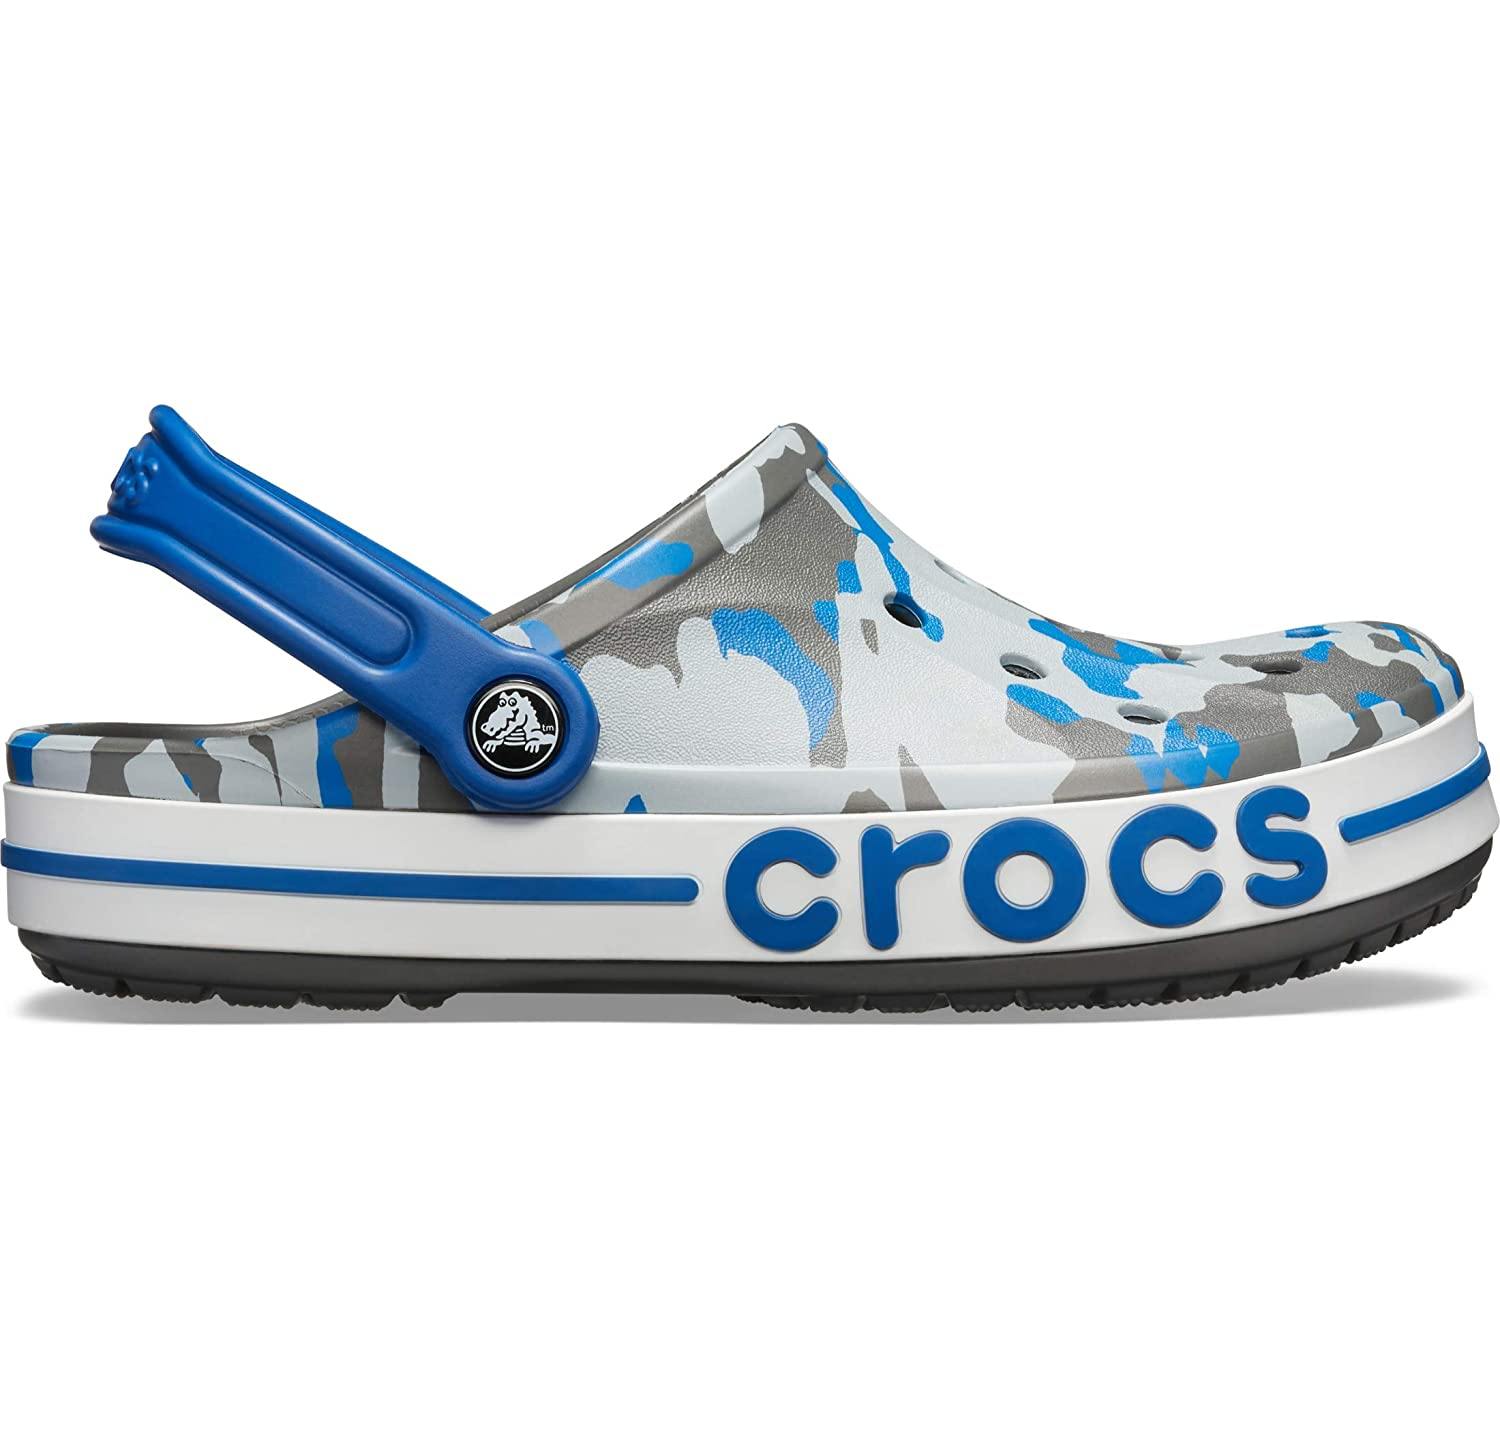 Authentic Crocs Bayaband Graphic Clog for Men and Women | mTravel Store ...